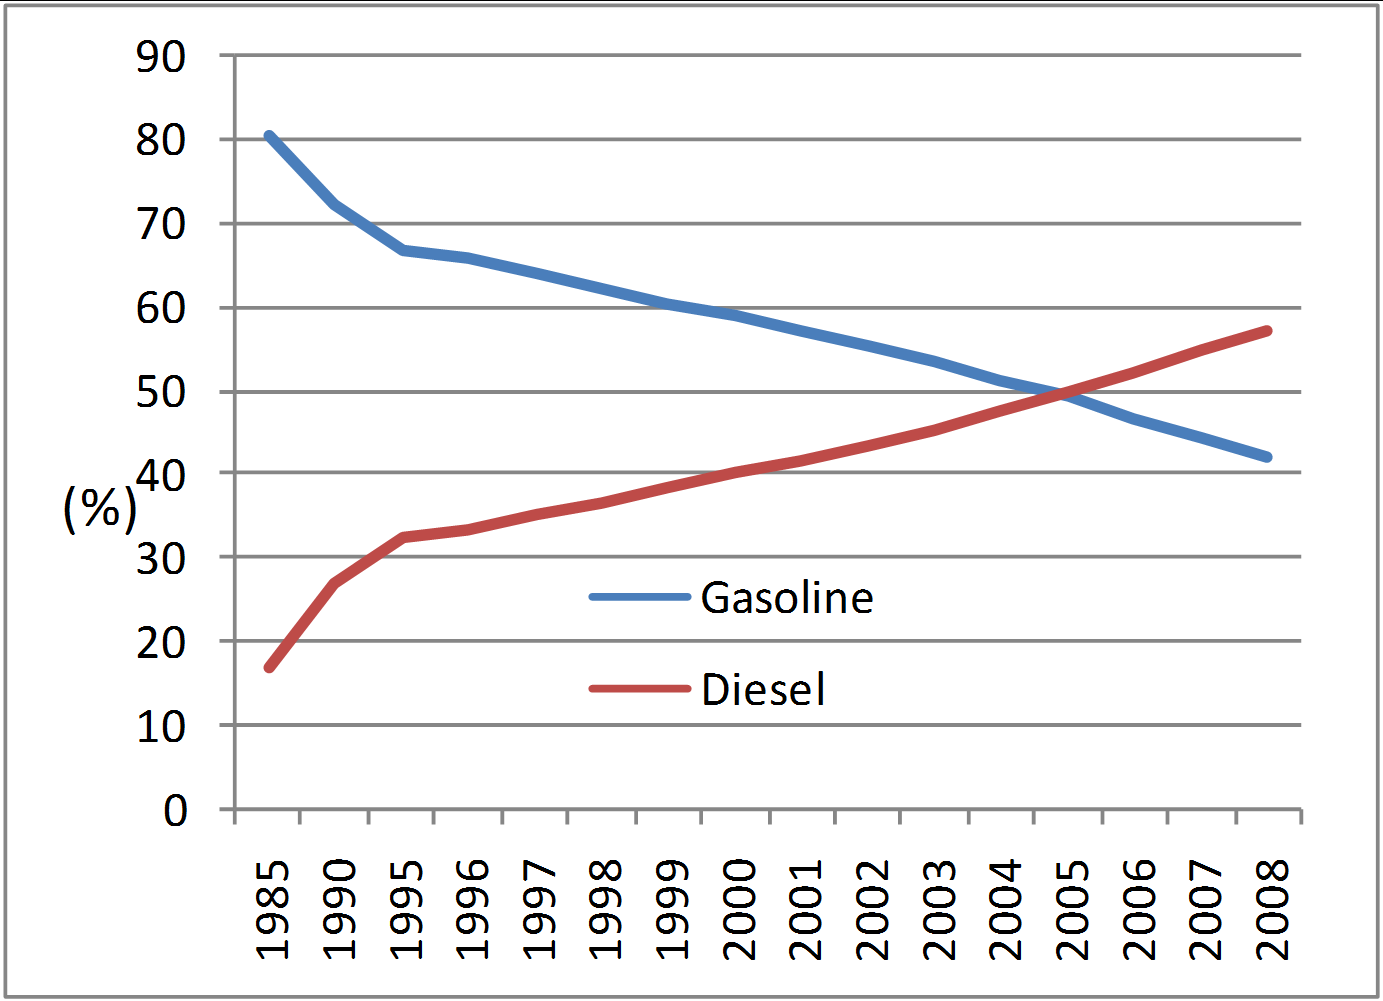 Graph 1: Stock of passenger cars by fuel type in Belgium, 1985-2008